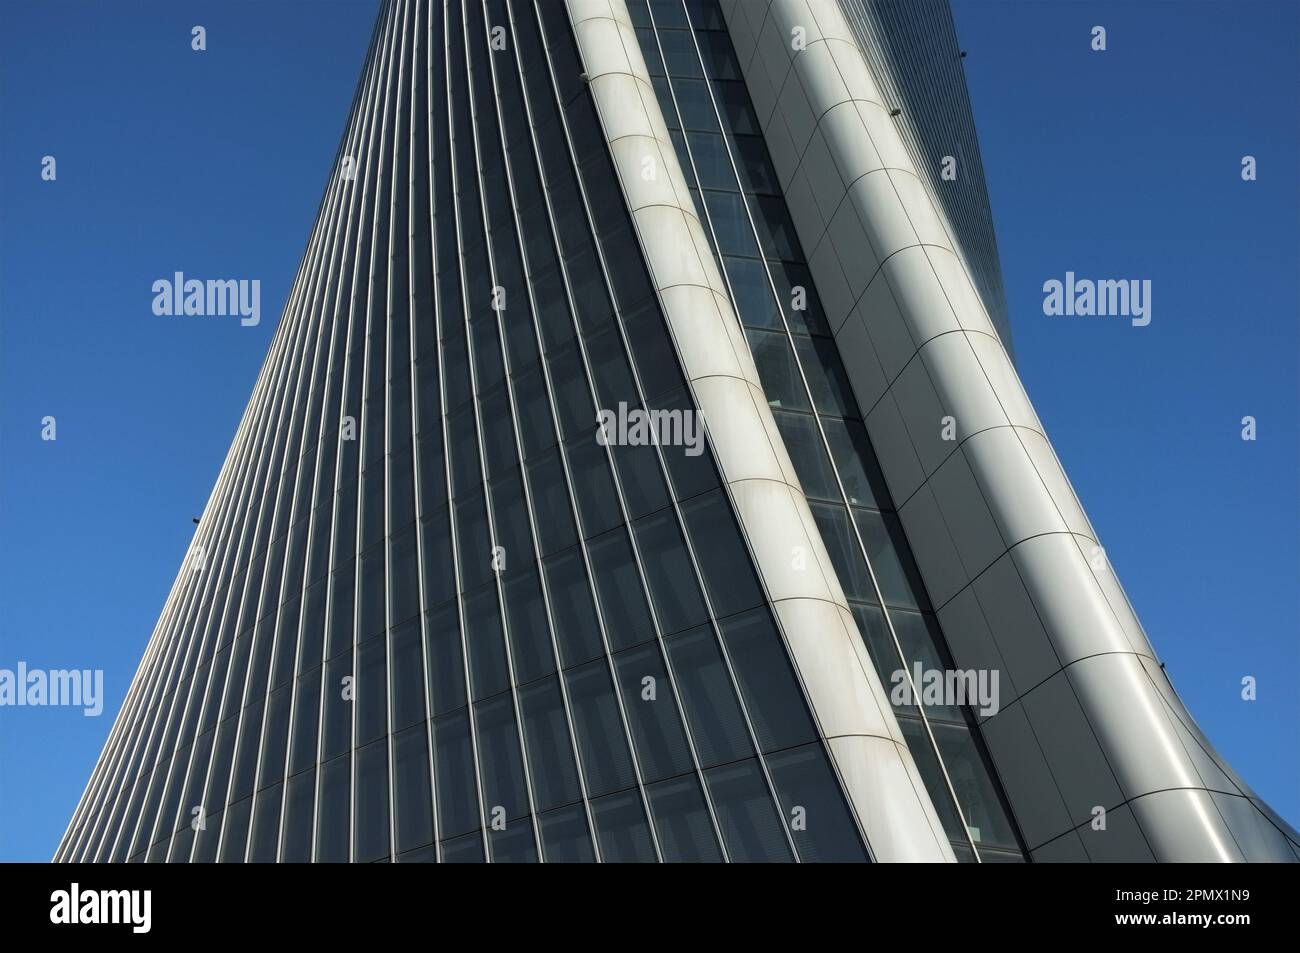 Mid section of the Generali Tower skyscraper in Milan, Italy. Stock Photo